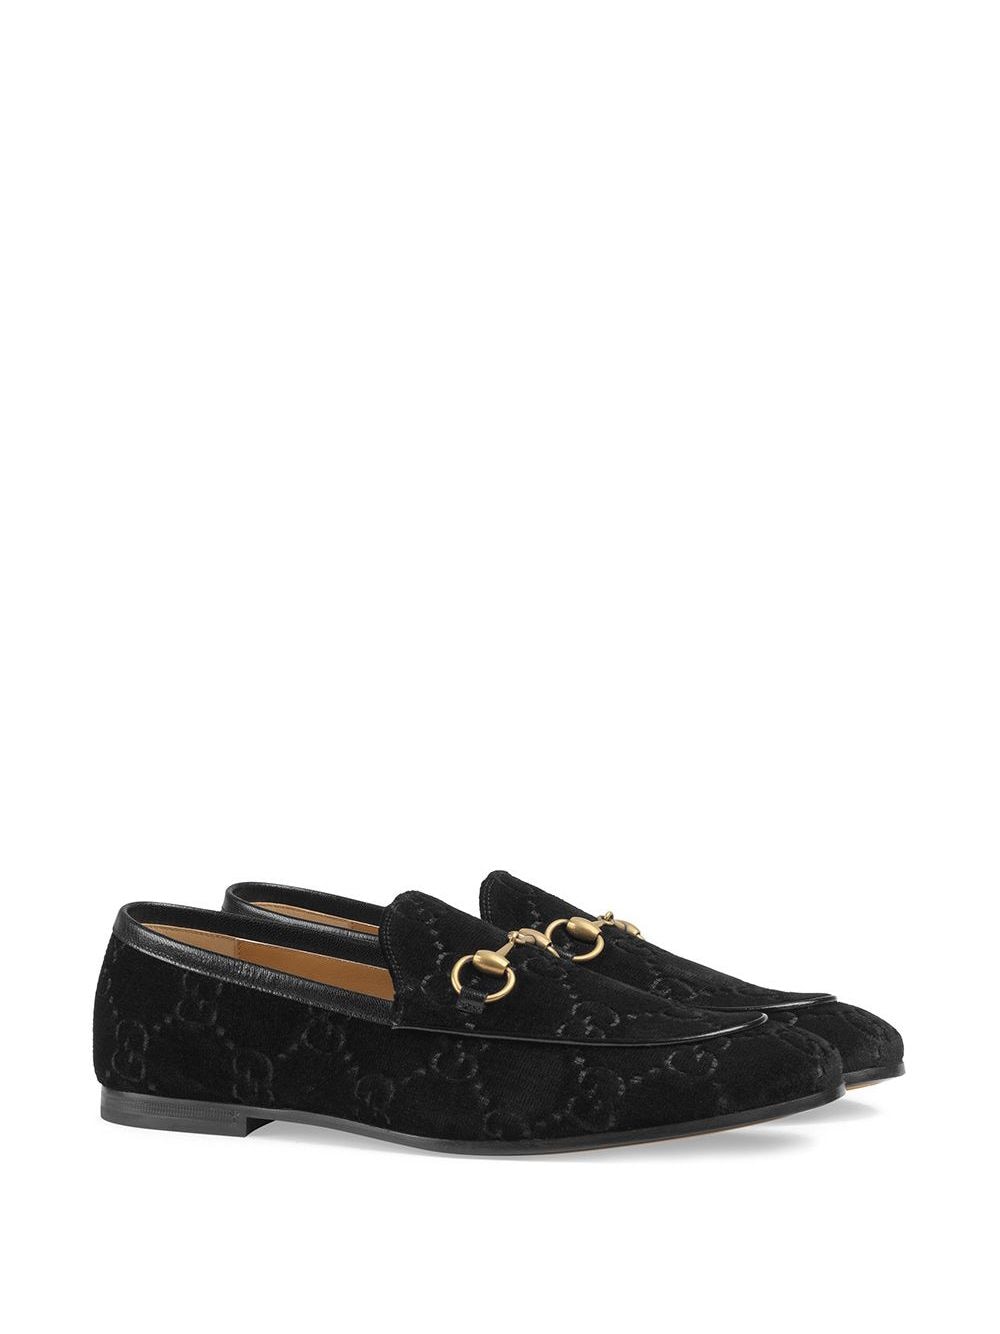 Shop Gucci Gucci Jordaan GG velvet loafers with Express Delivery - FARFETCH